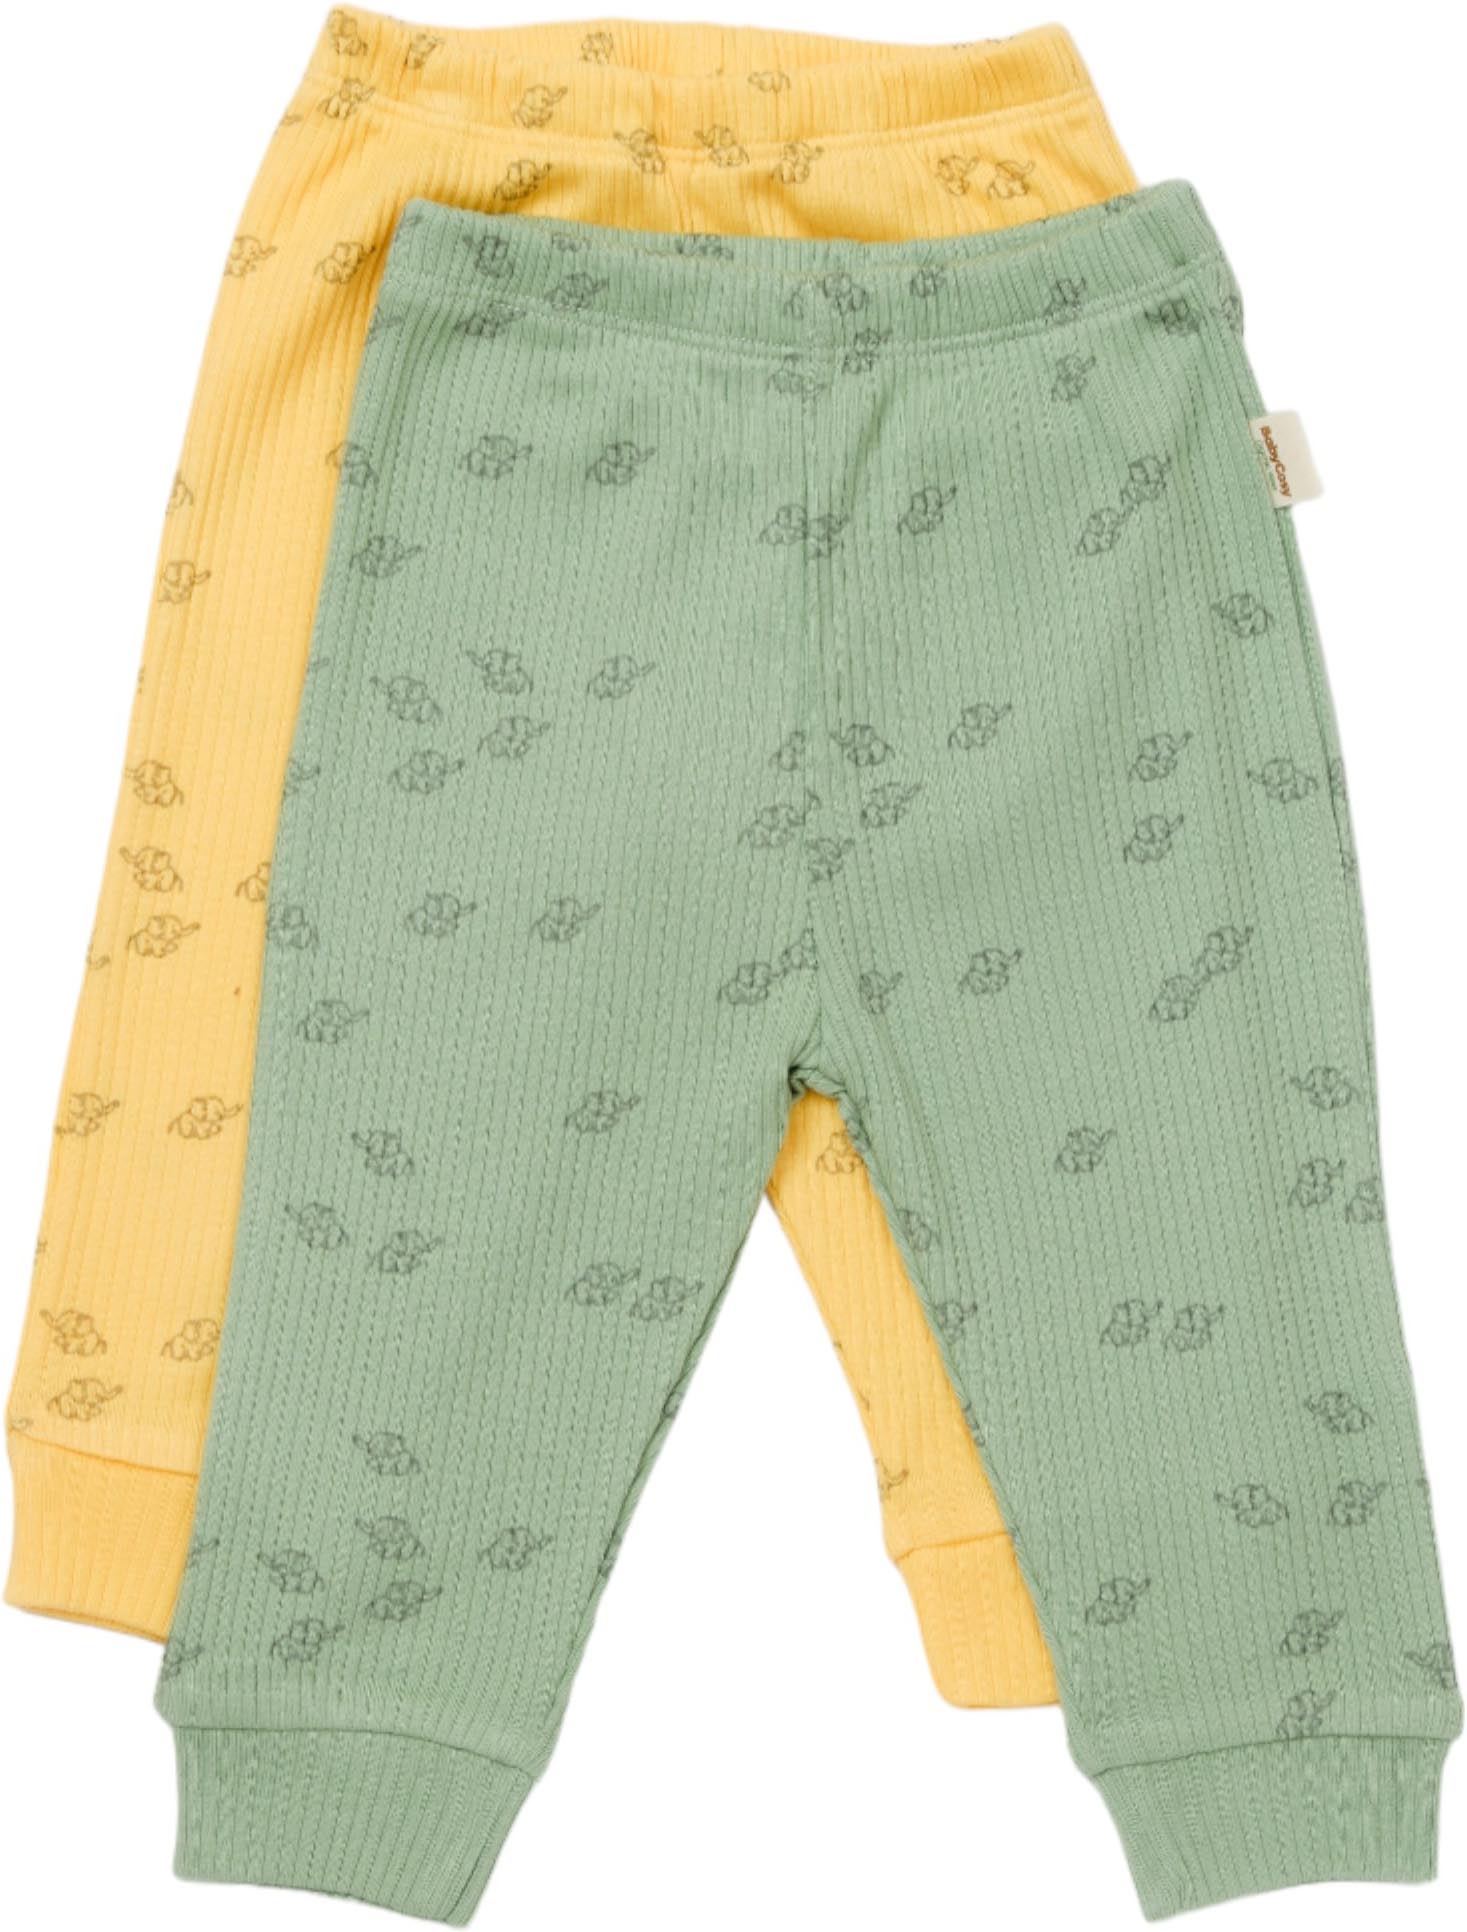 Pants set 2pcs (in a package of 5 sets)